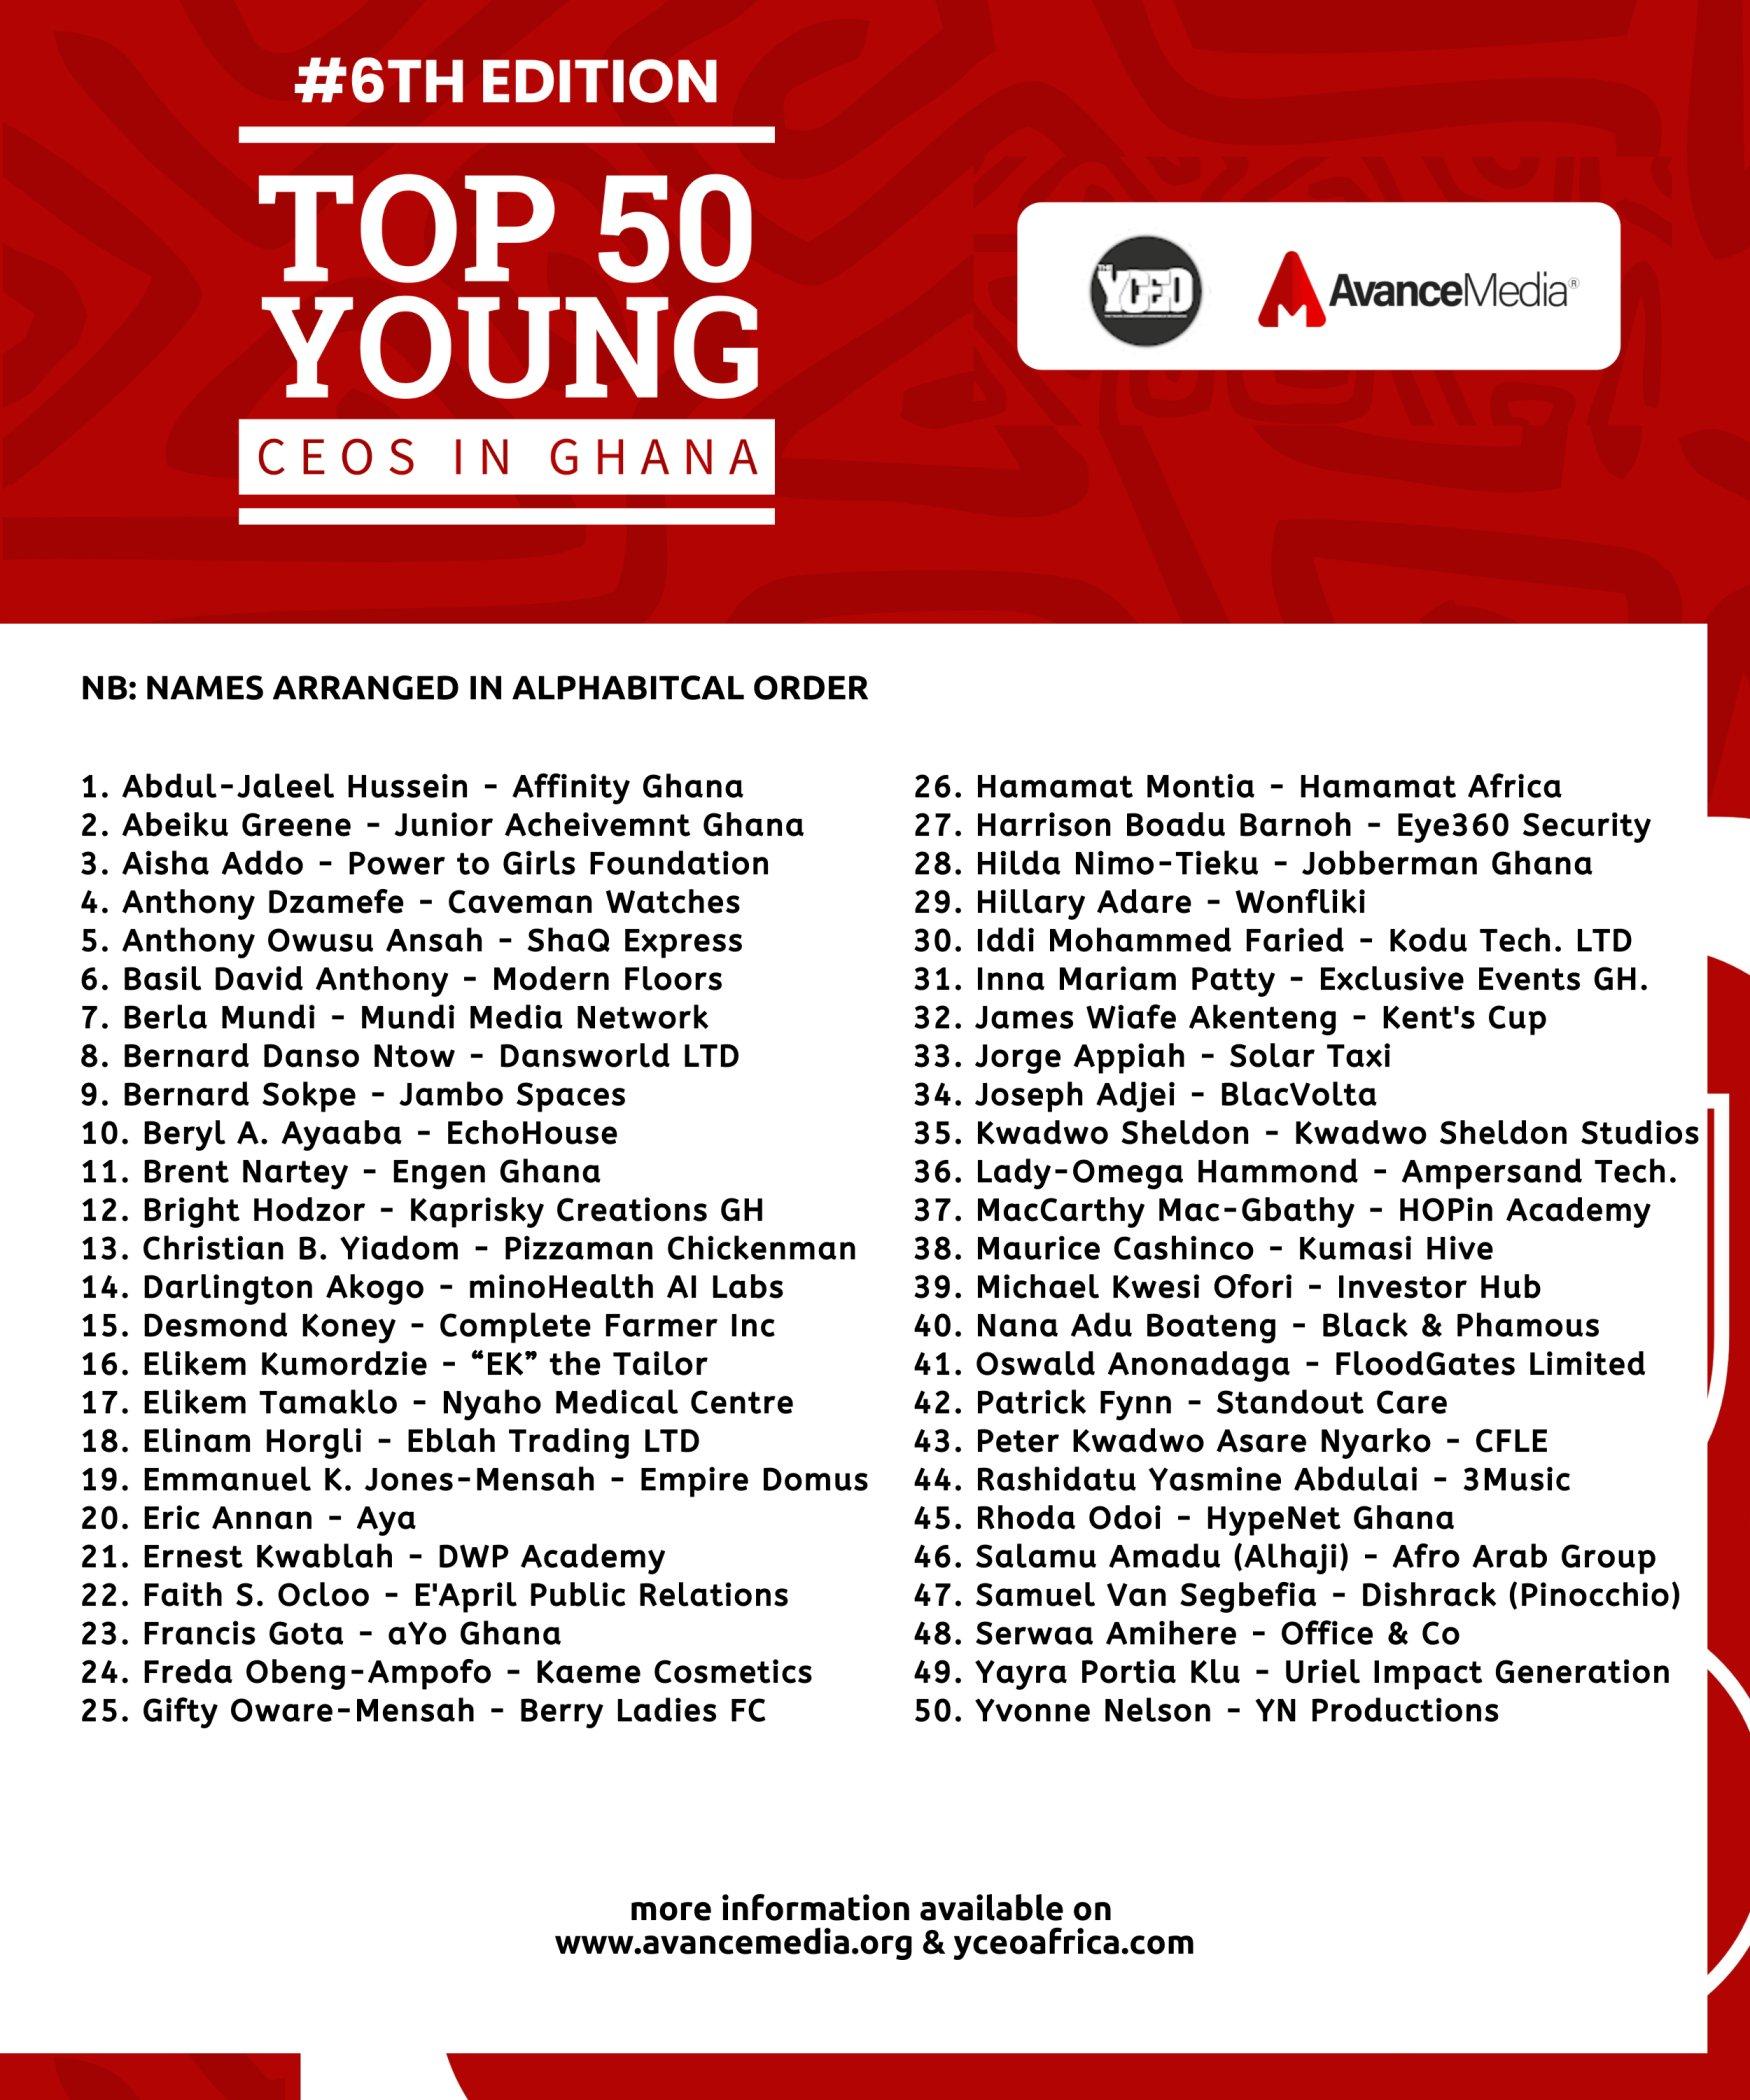 Young CEOs in Ghana